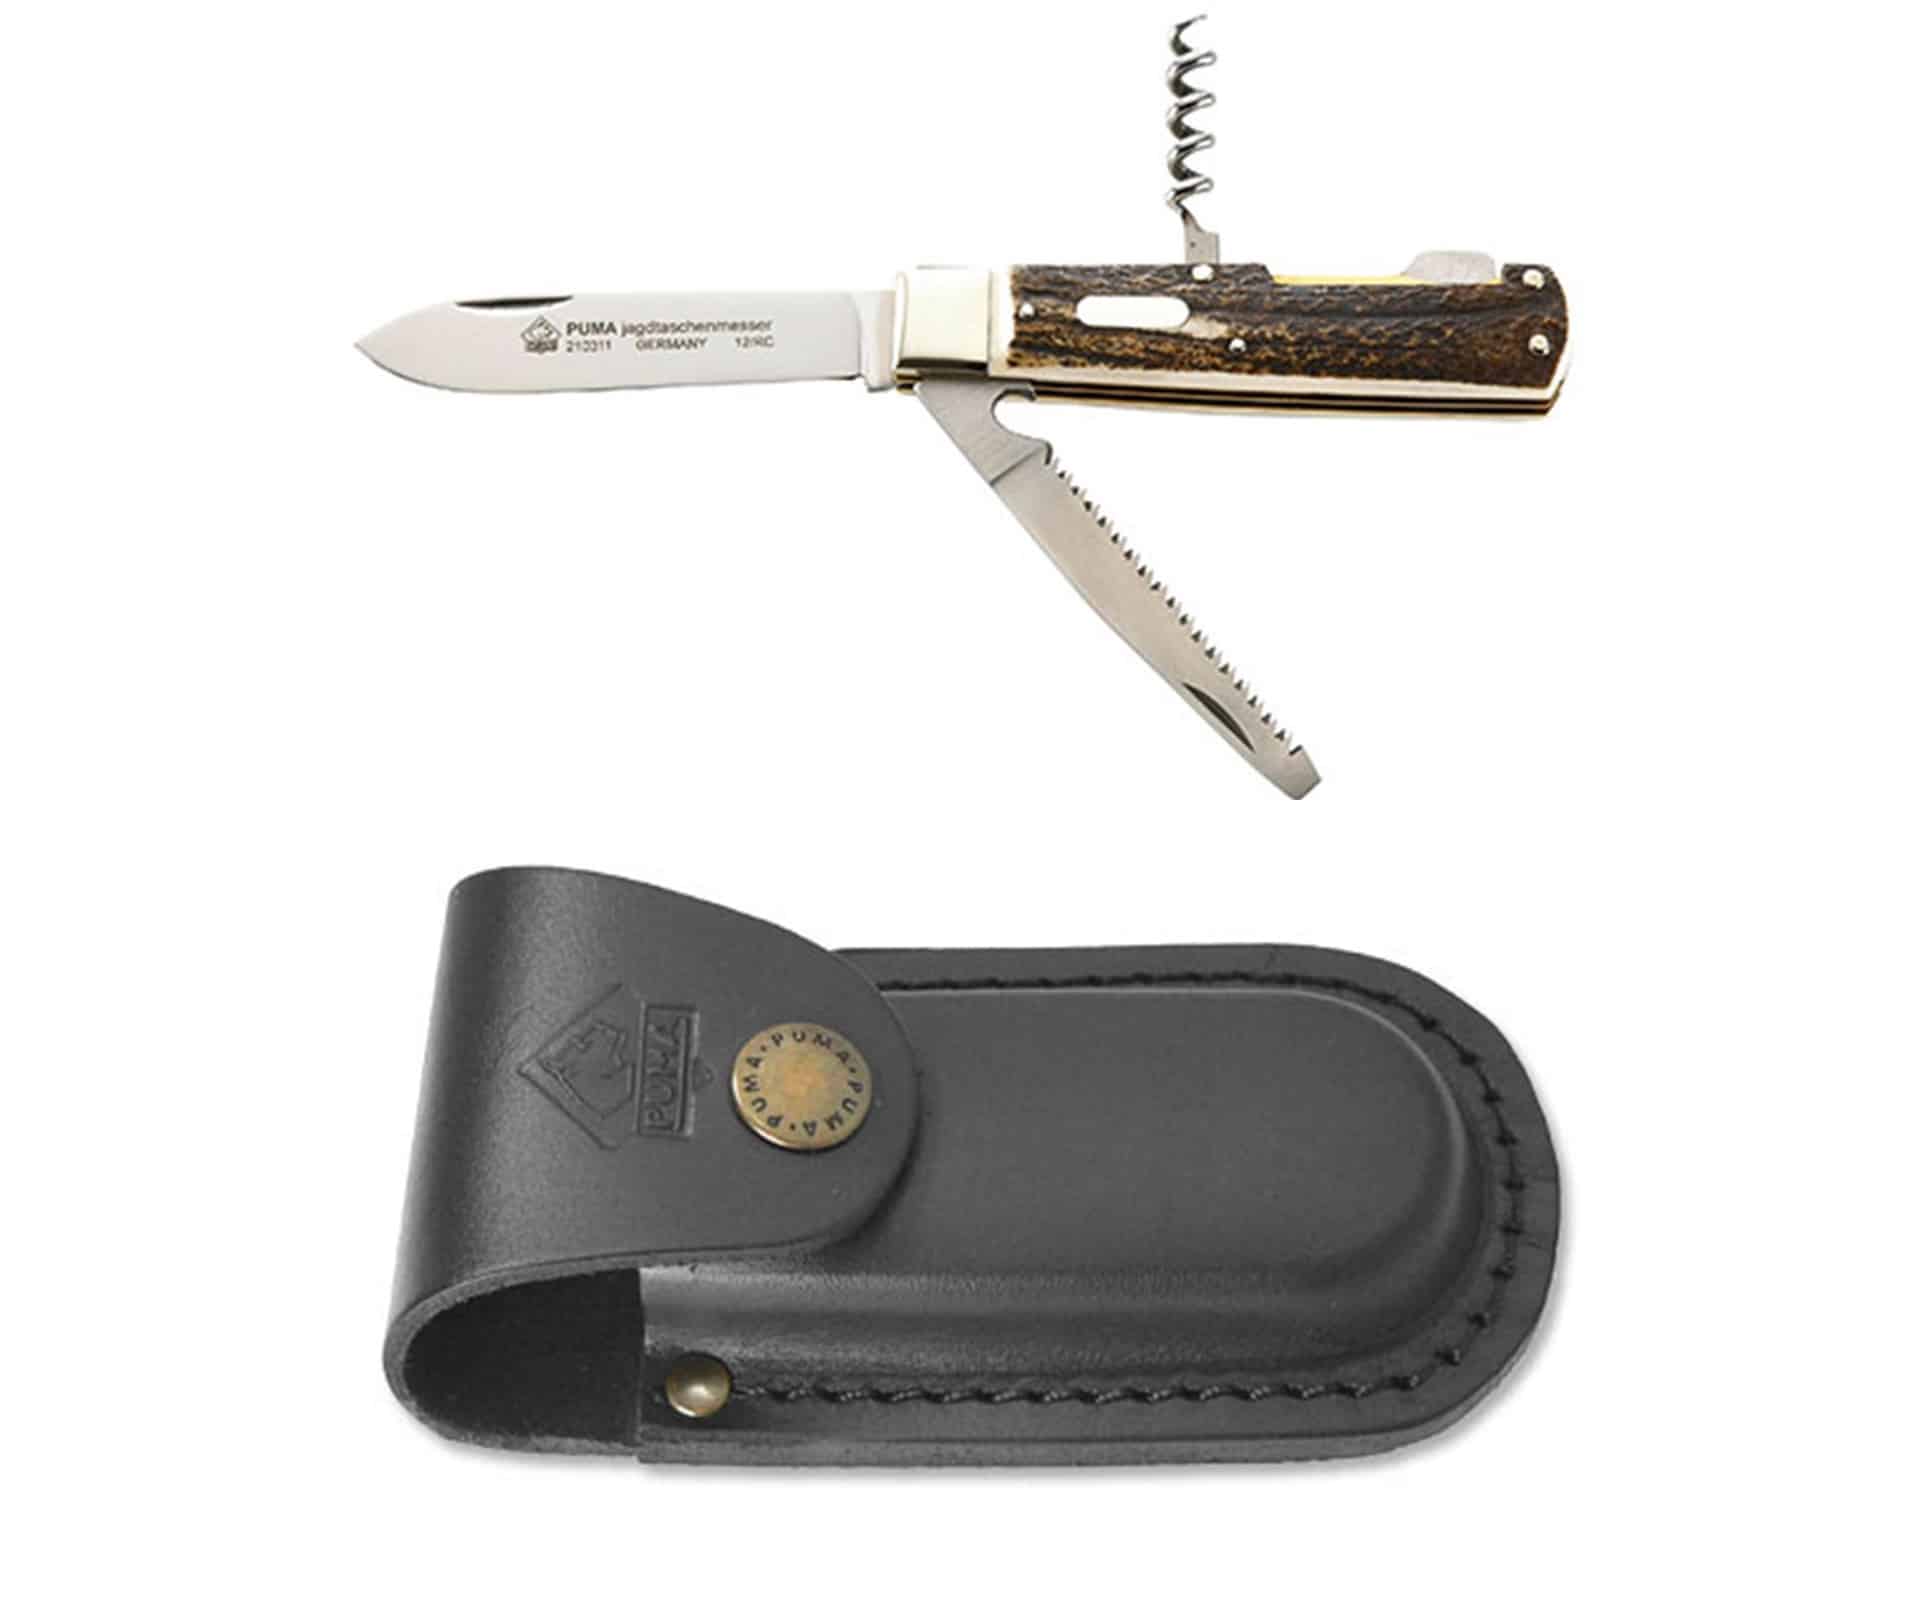 Puma hunting pocket knife 3-part with black belt pouch